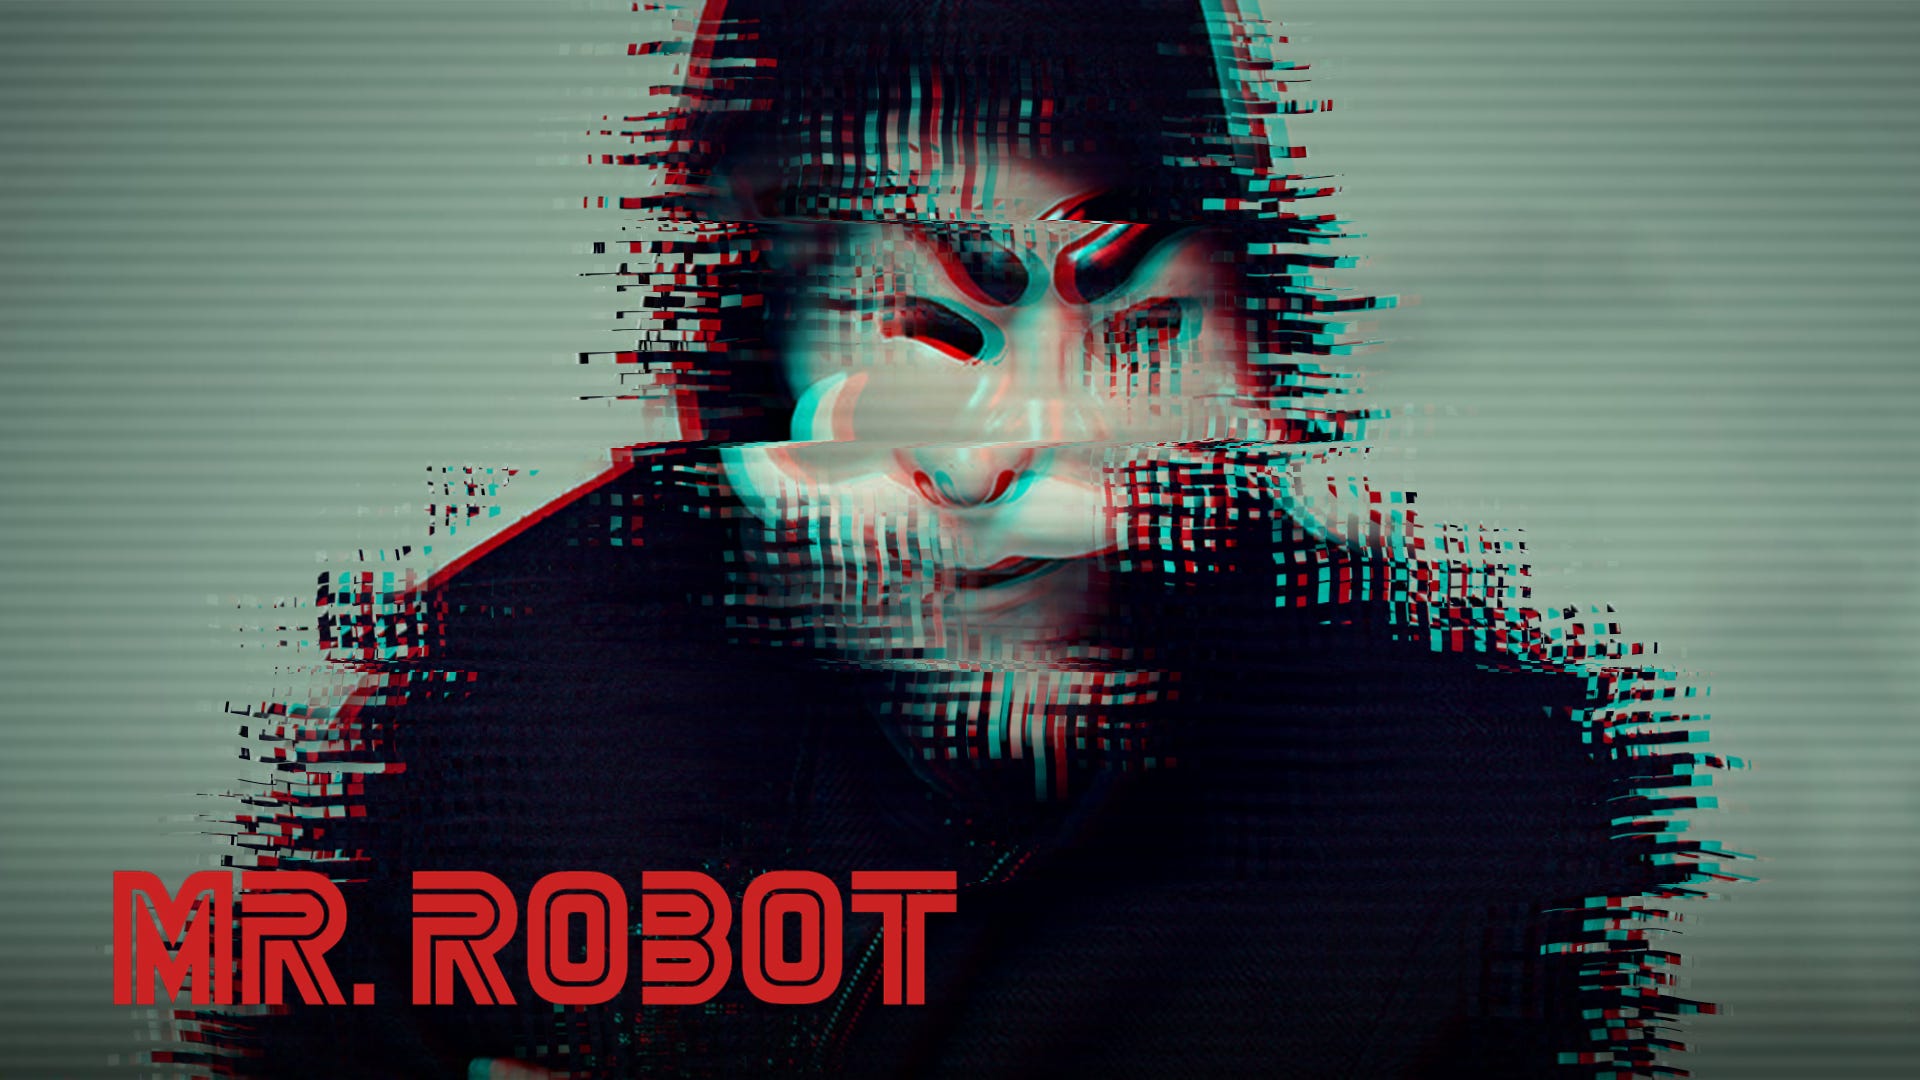 Mr. Robot Was A Documentary. Imagine a world where privacy is a